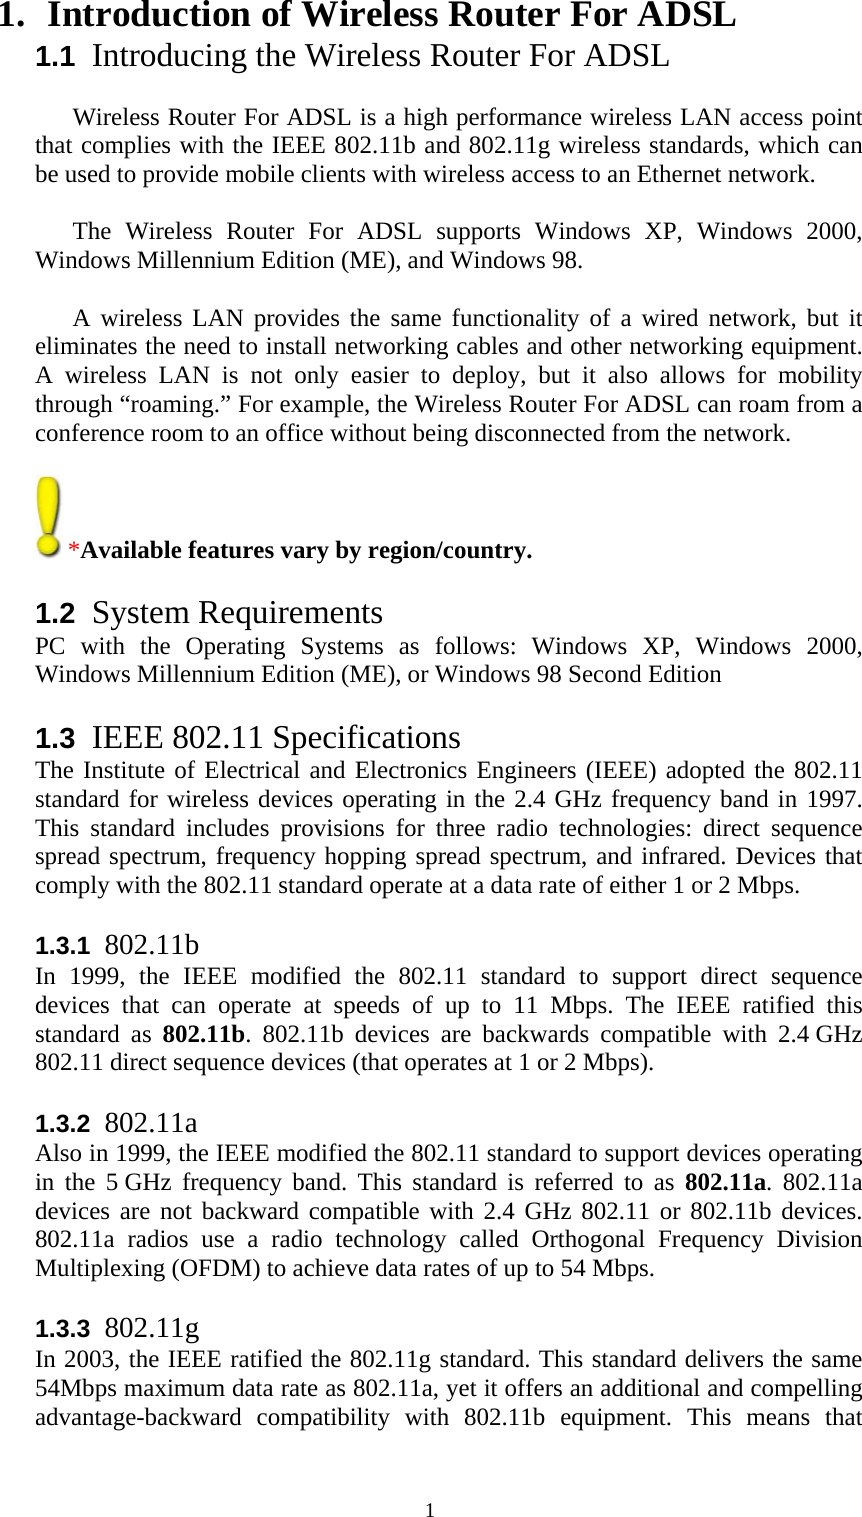   11. Introduction of Wireless Router For ADSL  1.1  Introducing the Wireless Router For ADSL  Wireless Router For ADSL is a high performance wireless LAN access point that complies with the IEEE 802.11b and 802.11g wireless standards, which can be used to provide mobile clients with wireless access to an Ethernet network.   The Wireless Router For ADSL supports Windows XP, Windows 2000, Windows Millennium Edition (ME), and Windows 98.   A wireless LAN provides the same functionality of a wired network, but it eliminates the need to install networking cables and other networking equipment. A wireless LAN is not only easier to deploy, but it also allows for mobility through “roaming.” For example, the Wireless Router For ADSL can roam from a conference room to an office without being disconnected from the network.   *Available features vary by region/country.  1.2  System Requirements PC with the Operating Systems as follows: Windows XP, Windows 2000, Windows Millennium Edition (ME), or Windows 98 Second Edition   1.3  IEEE 802.11 Specifications The Institute of Electrical and Electronics Engineers (IEEE) adopted the 802.11 standard for wireless devices operating in the 2.4 GHz frequency band in 1997. This standard includes provisions for three radio technologies: direct sequence spread spectrum, frequency hopping spread spectrum, and infrared. Devices that comply with the 802.11 standard operate at a data rate of either 1 or 2 Mbps.  1.3.1  802.11b In 1999, the IEEE modified the 802.11 standard to support direct sequence devices that can operate at speeds of up to 11 Mbps. The IEEE ratified this standard as 802.11b. 802.11b devices are backwards compatible with 2.4 GHz 802.11 direct sequence devices (that operates at 1 or 2 Mbps).  1.3.2  802.11a Also in 1999, the IEEE modified the 802.11 standard to support devices operating in the 5 GHz frequency band. This standard is referred to as 802.11a. 802.11a devices are not backward compatible with 2.4 GHz 802.11 or 802.11b devices. 802.11a radios use a radio technology called Orthogonal Frequency Division Multiplexing (OFDM) to achieve data rates of up to 54 Mbps.   1.3.3  802.11g In 2003, the IEEE ratified the 802.11g standard. This standard delivers the same 54Mbps maximum data rate as 802.11a, yet it offers an additional and compelling advantage-backward compatibility with 802.11b equipment. This means that 